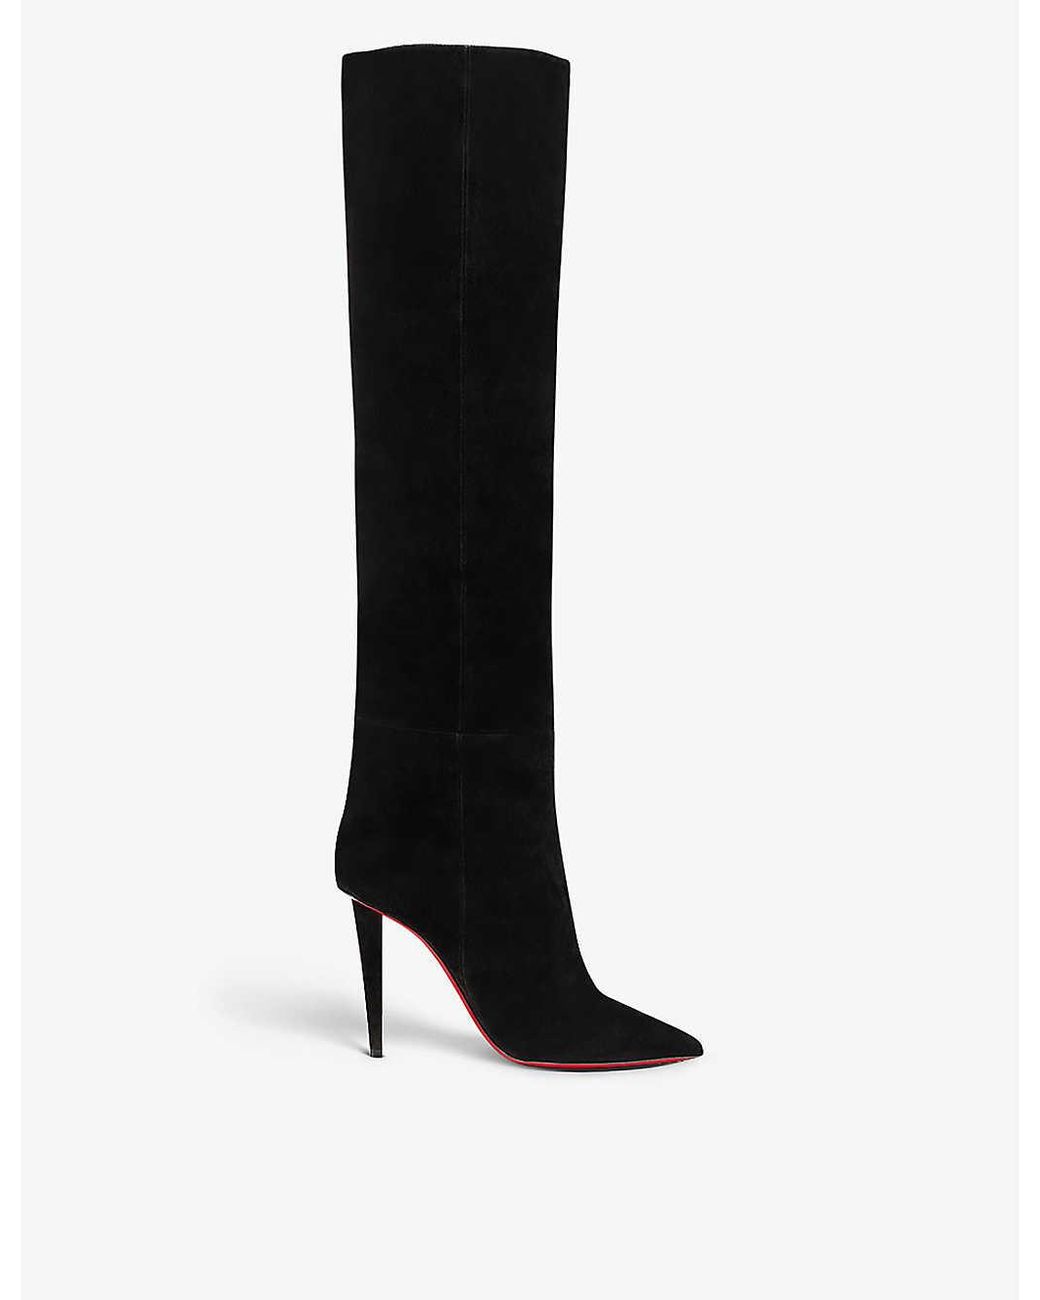 Christian Louboutin Astrilarge 100 Suede Heeled Boots in Black | Lyst